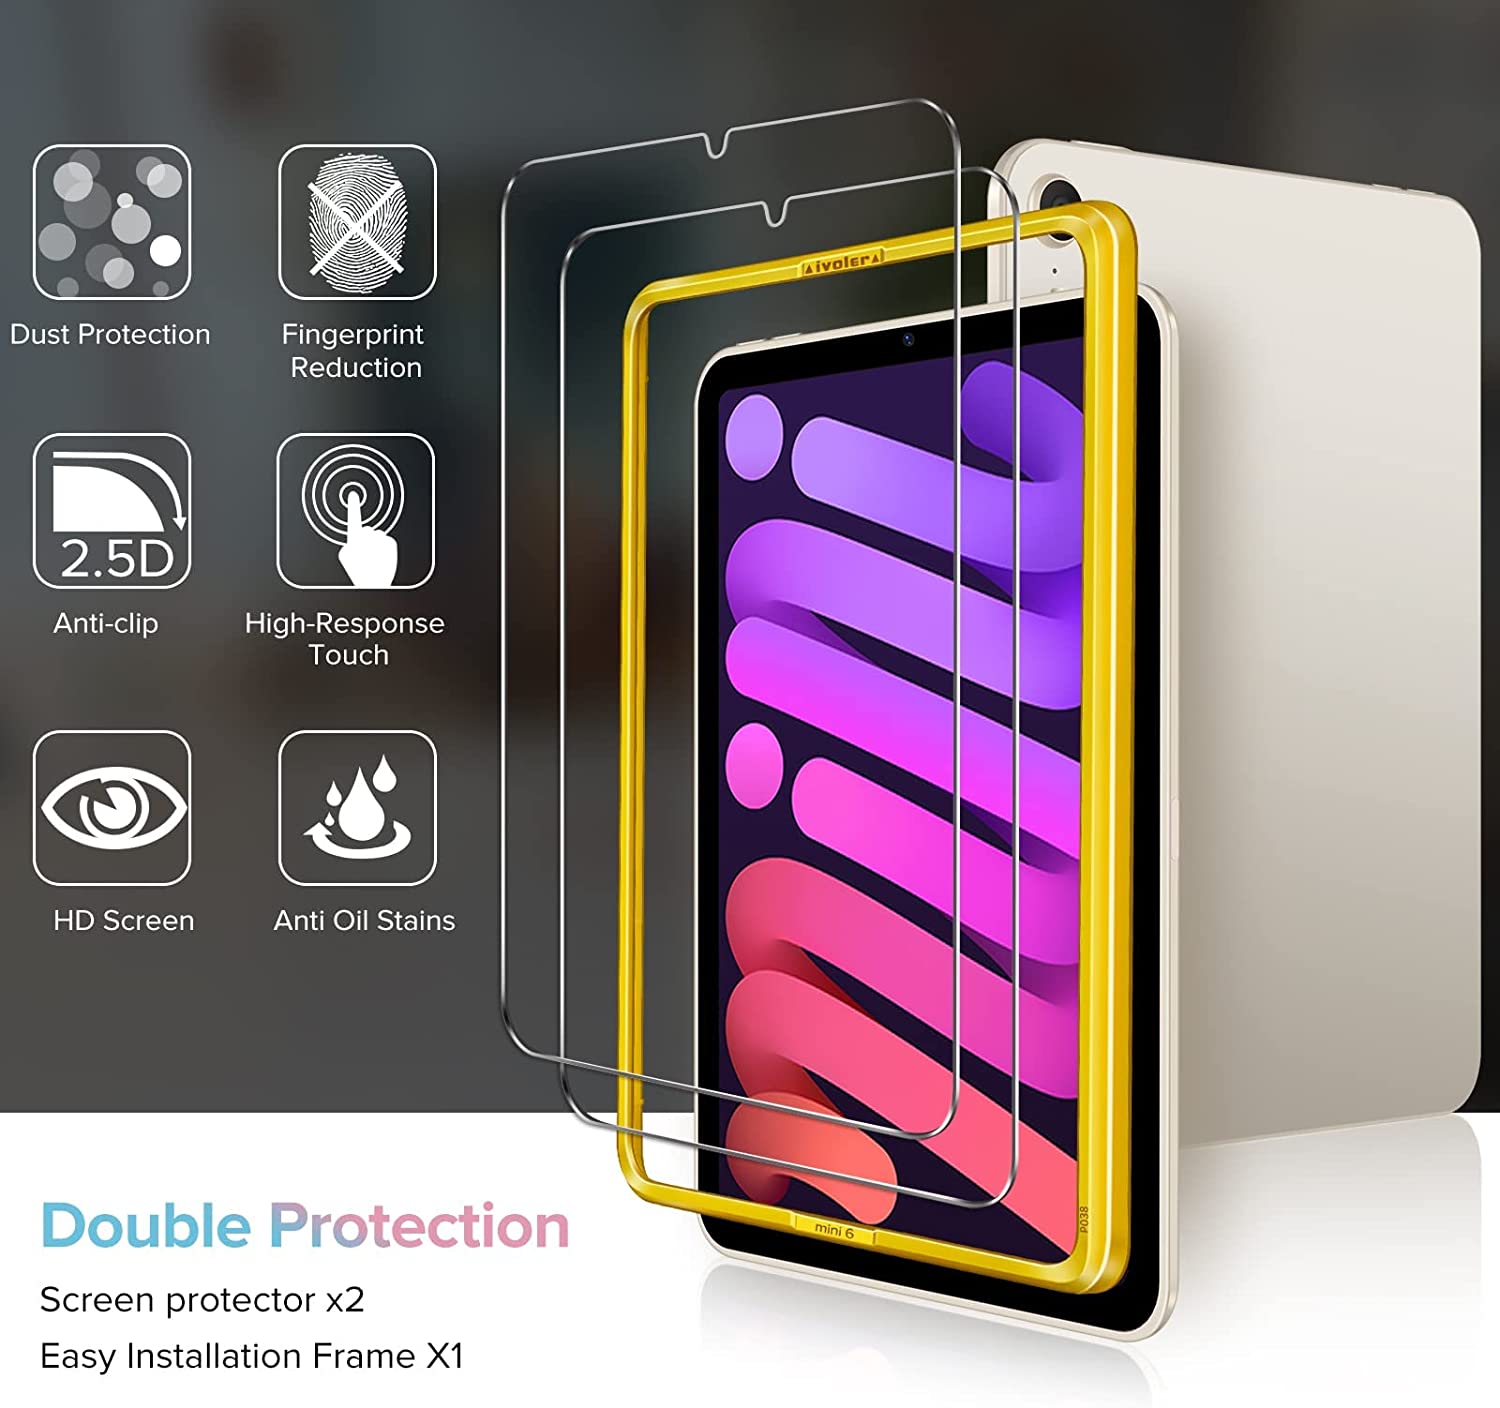 Tempered Glass Screen Protector for iPad Mini 6 2021 with Alignment Frame for Easy Installation